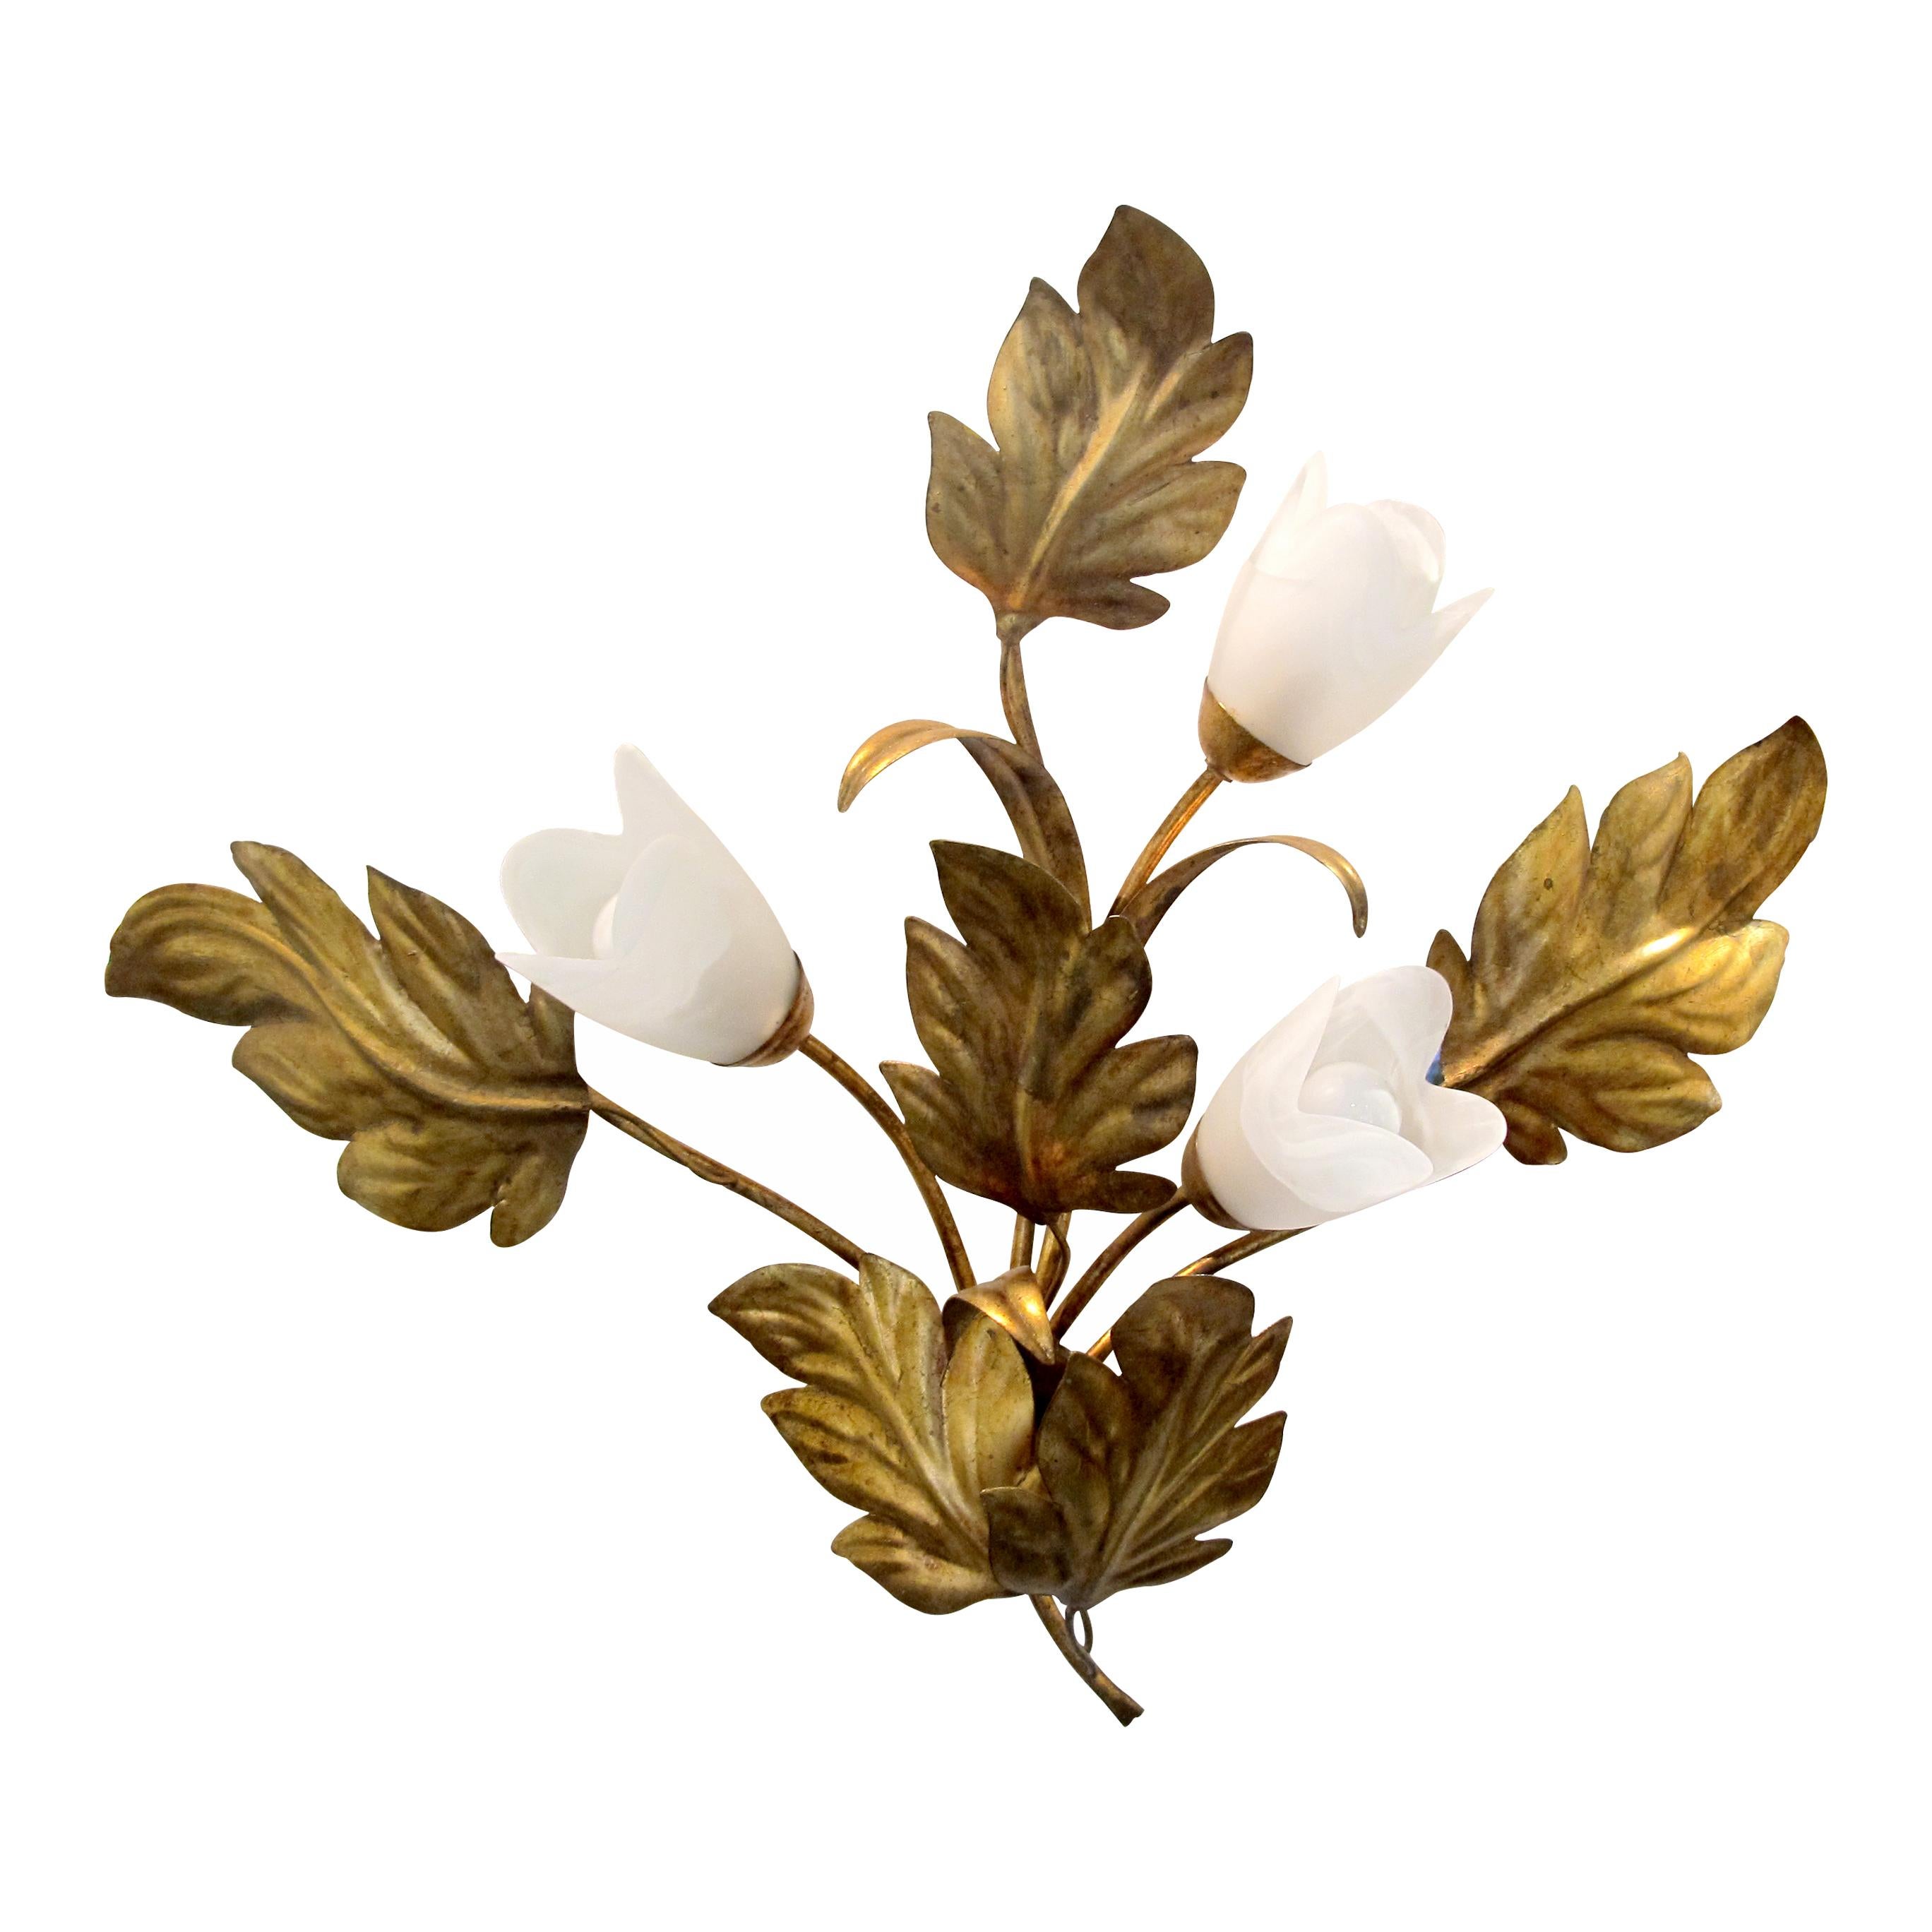 Large pair of mid-century gilt metal floral lights by the acclaimed German designer Hans Kögl. Each wall light boasts three tulip-shaped frosted glass shades with a marbling effect. The wall lights are in good condition and highly decorative.